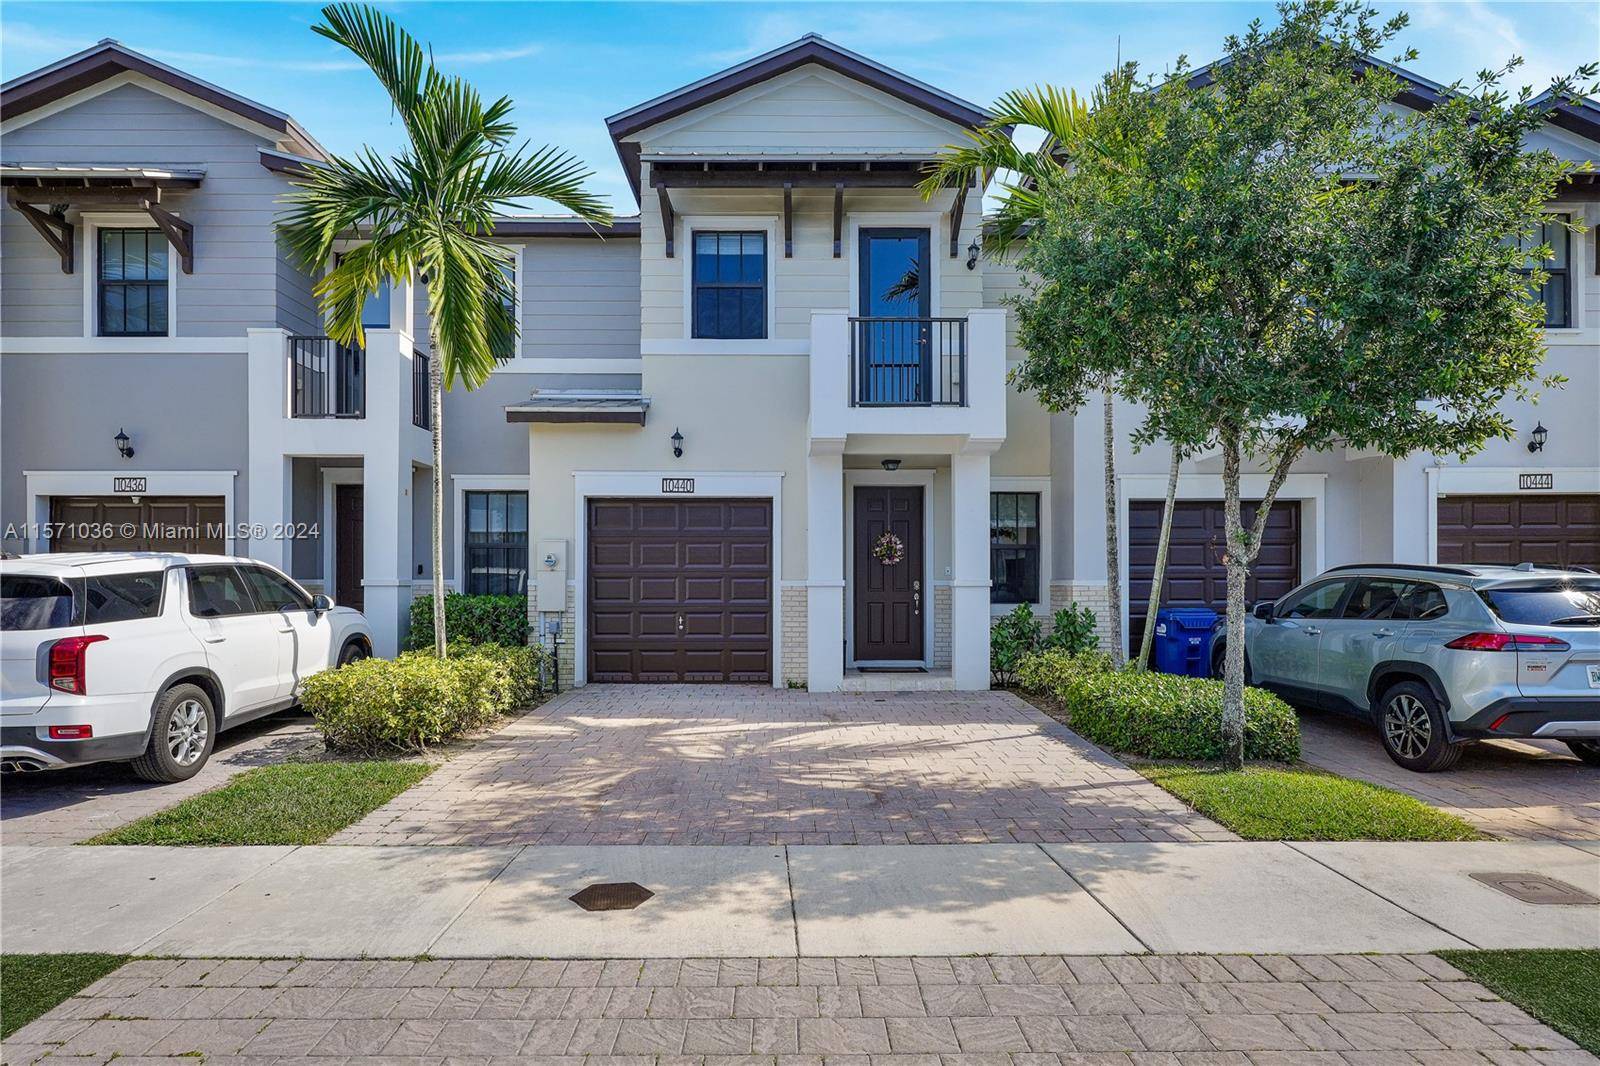 Introducing your dream home in Doral Cay 4 beds, 3 baths, with a convenient downstairs bedroom.